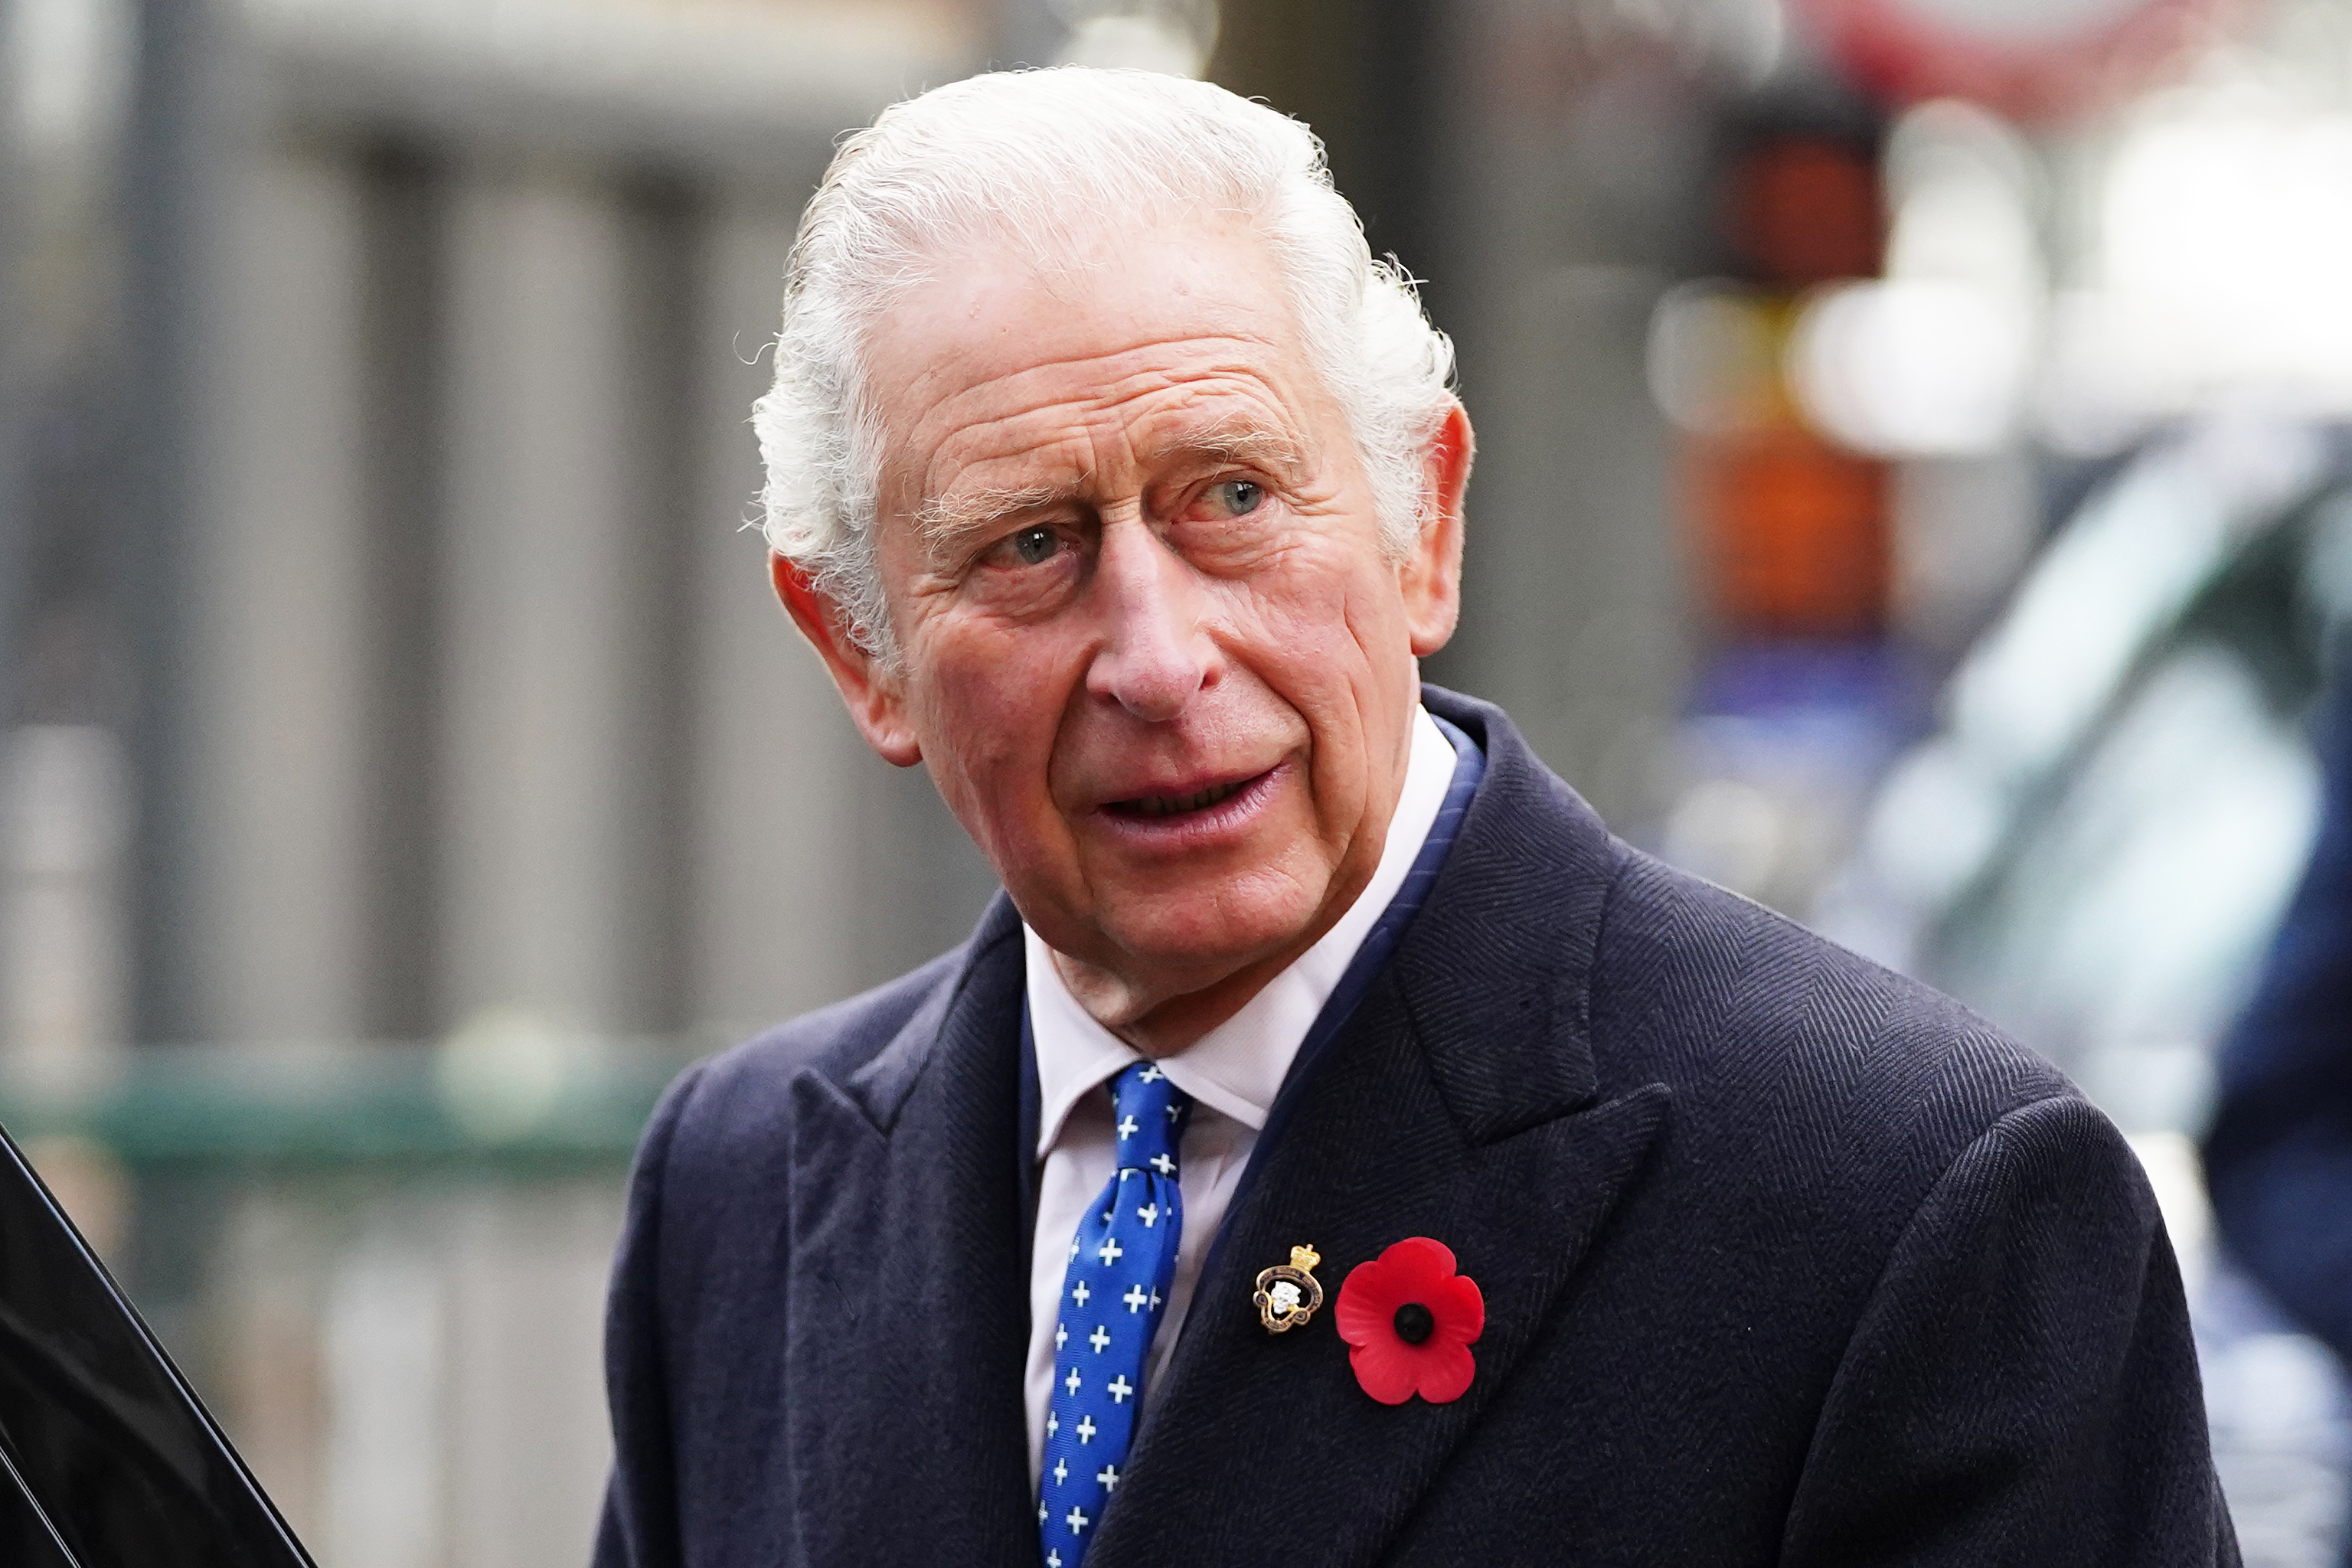 Prince Charles, Prince of Wales, visits Glasgow Central Station to view two alternative fuels, green trains, as part of Network Rail's "Green Trains @ COP26" event in Glasgow, Scotland on November 5, 2021. | Source: Getty Images